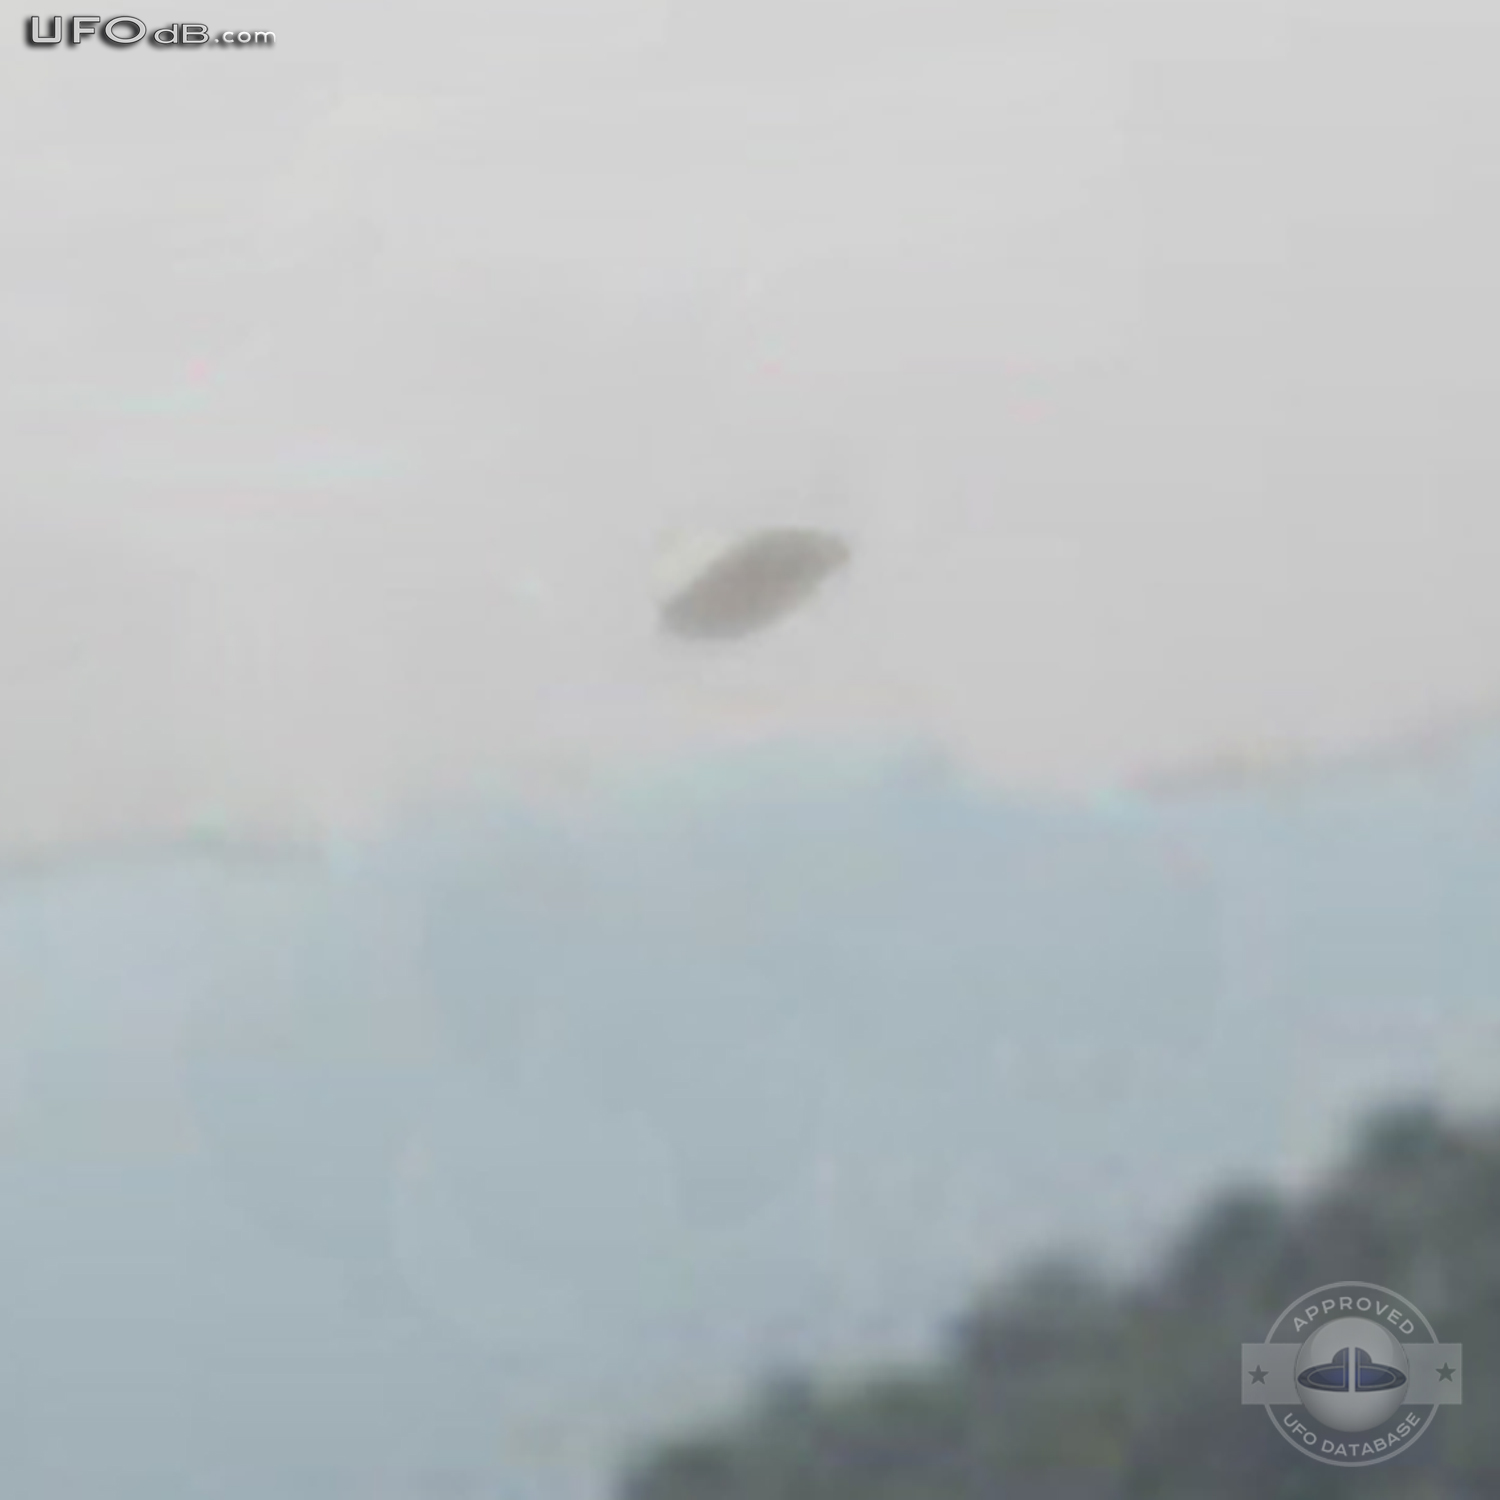 Humming whirring sounds heard with UFO picture | Hangzhou | April 2011 UFO Picture #332-5